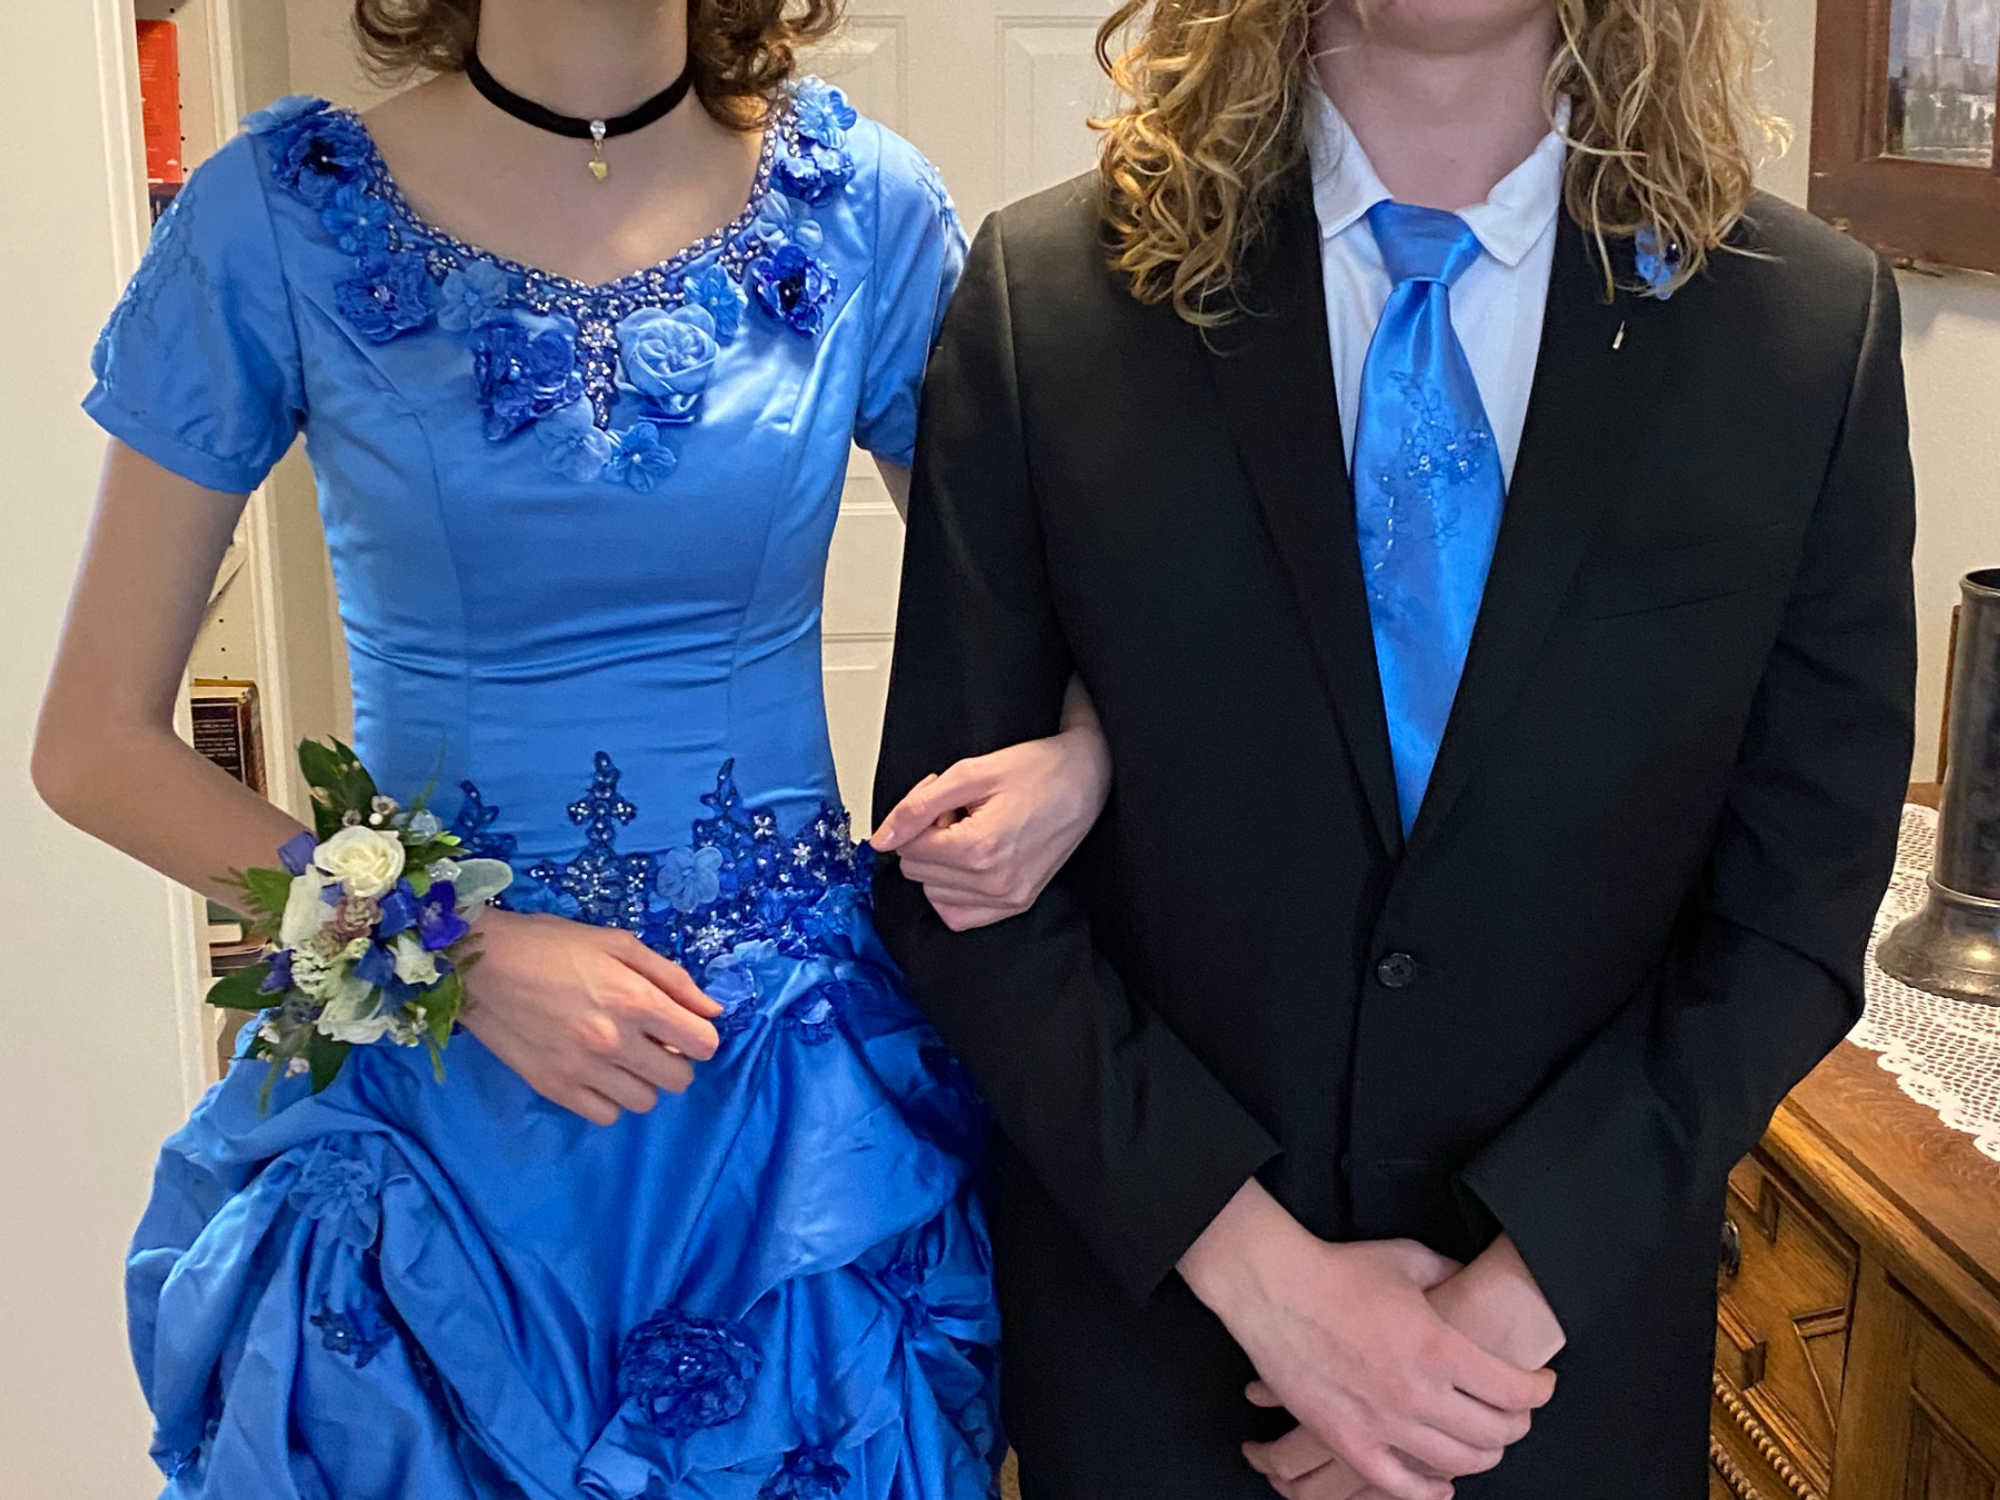 A young woman, wearing a secondhand wedding dress from DI that has been dyed blue, and her Prom date, wearing a tie made from the same dyed material as the dress.